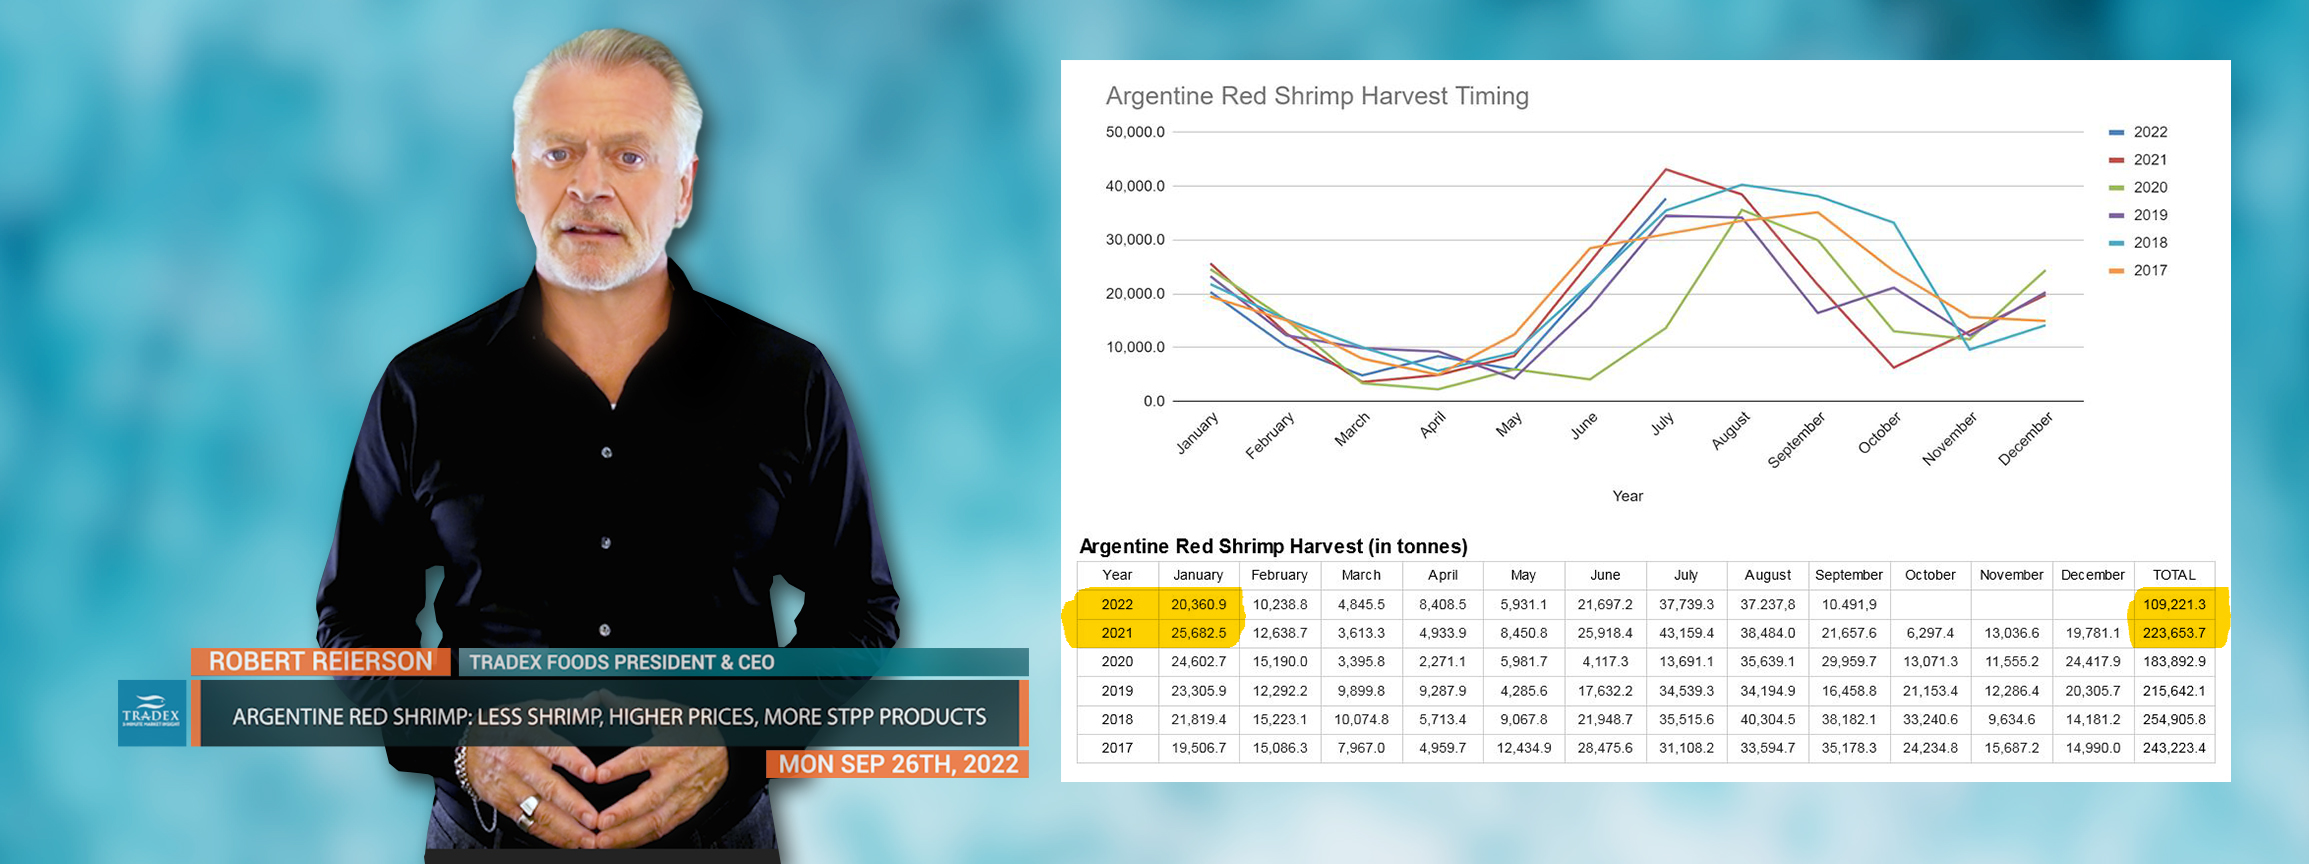 Argentine Red Shrimp: Less Shrimp, Higher Prices, More STPP Soaked Product